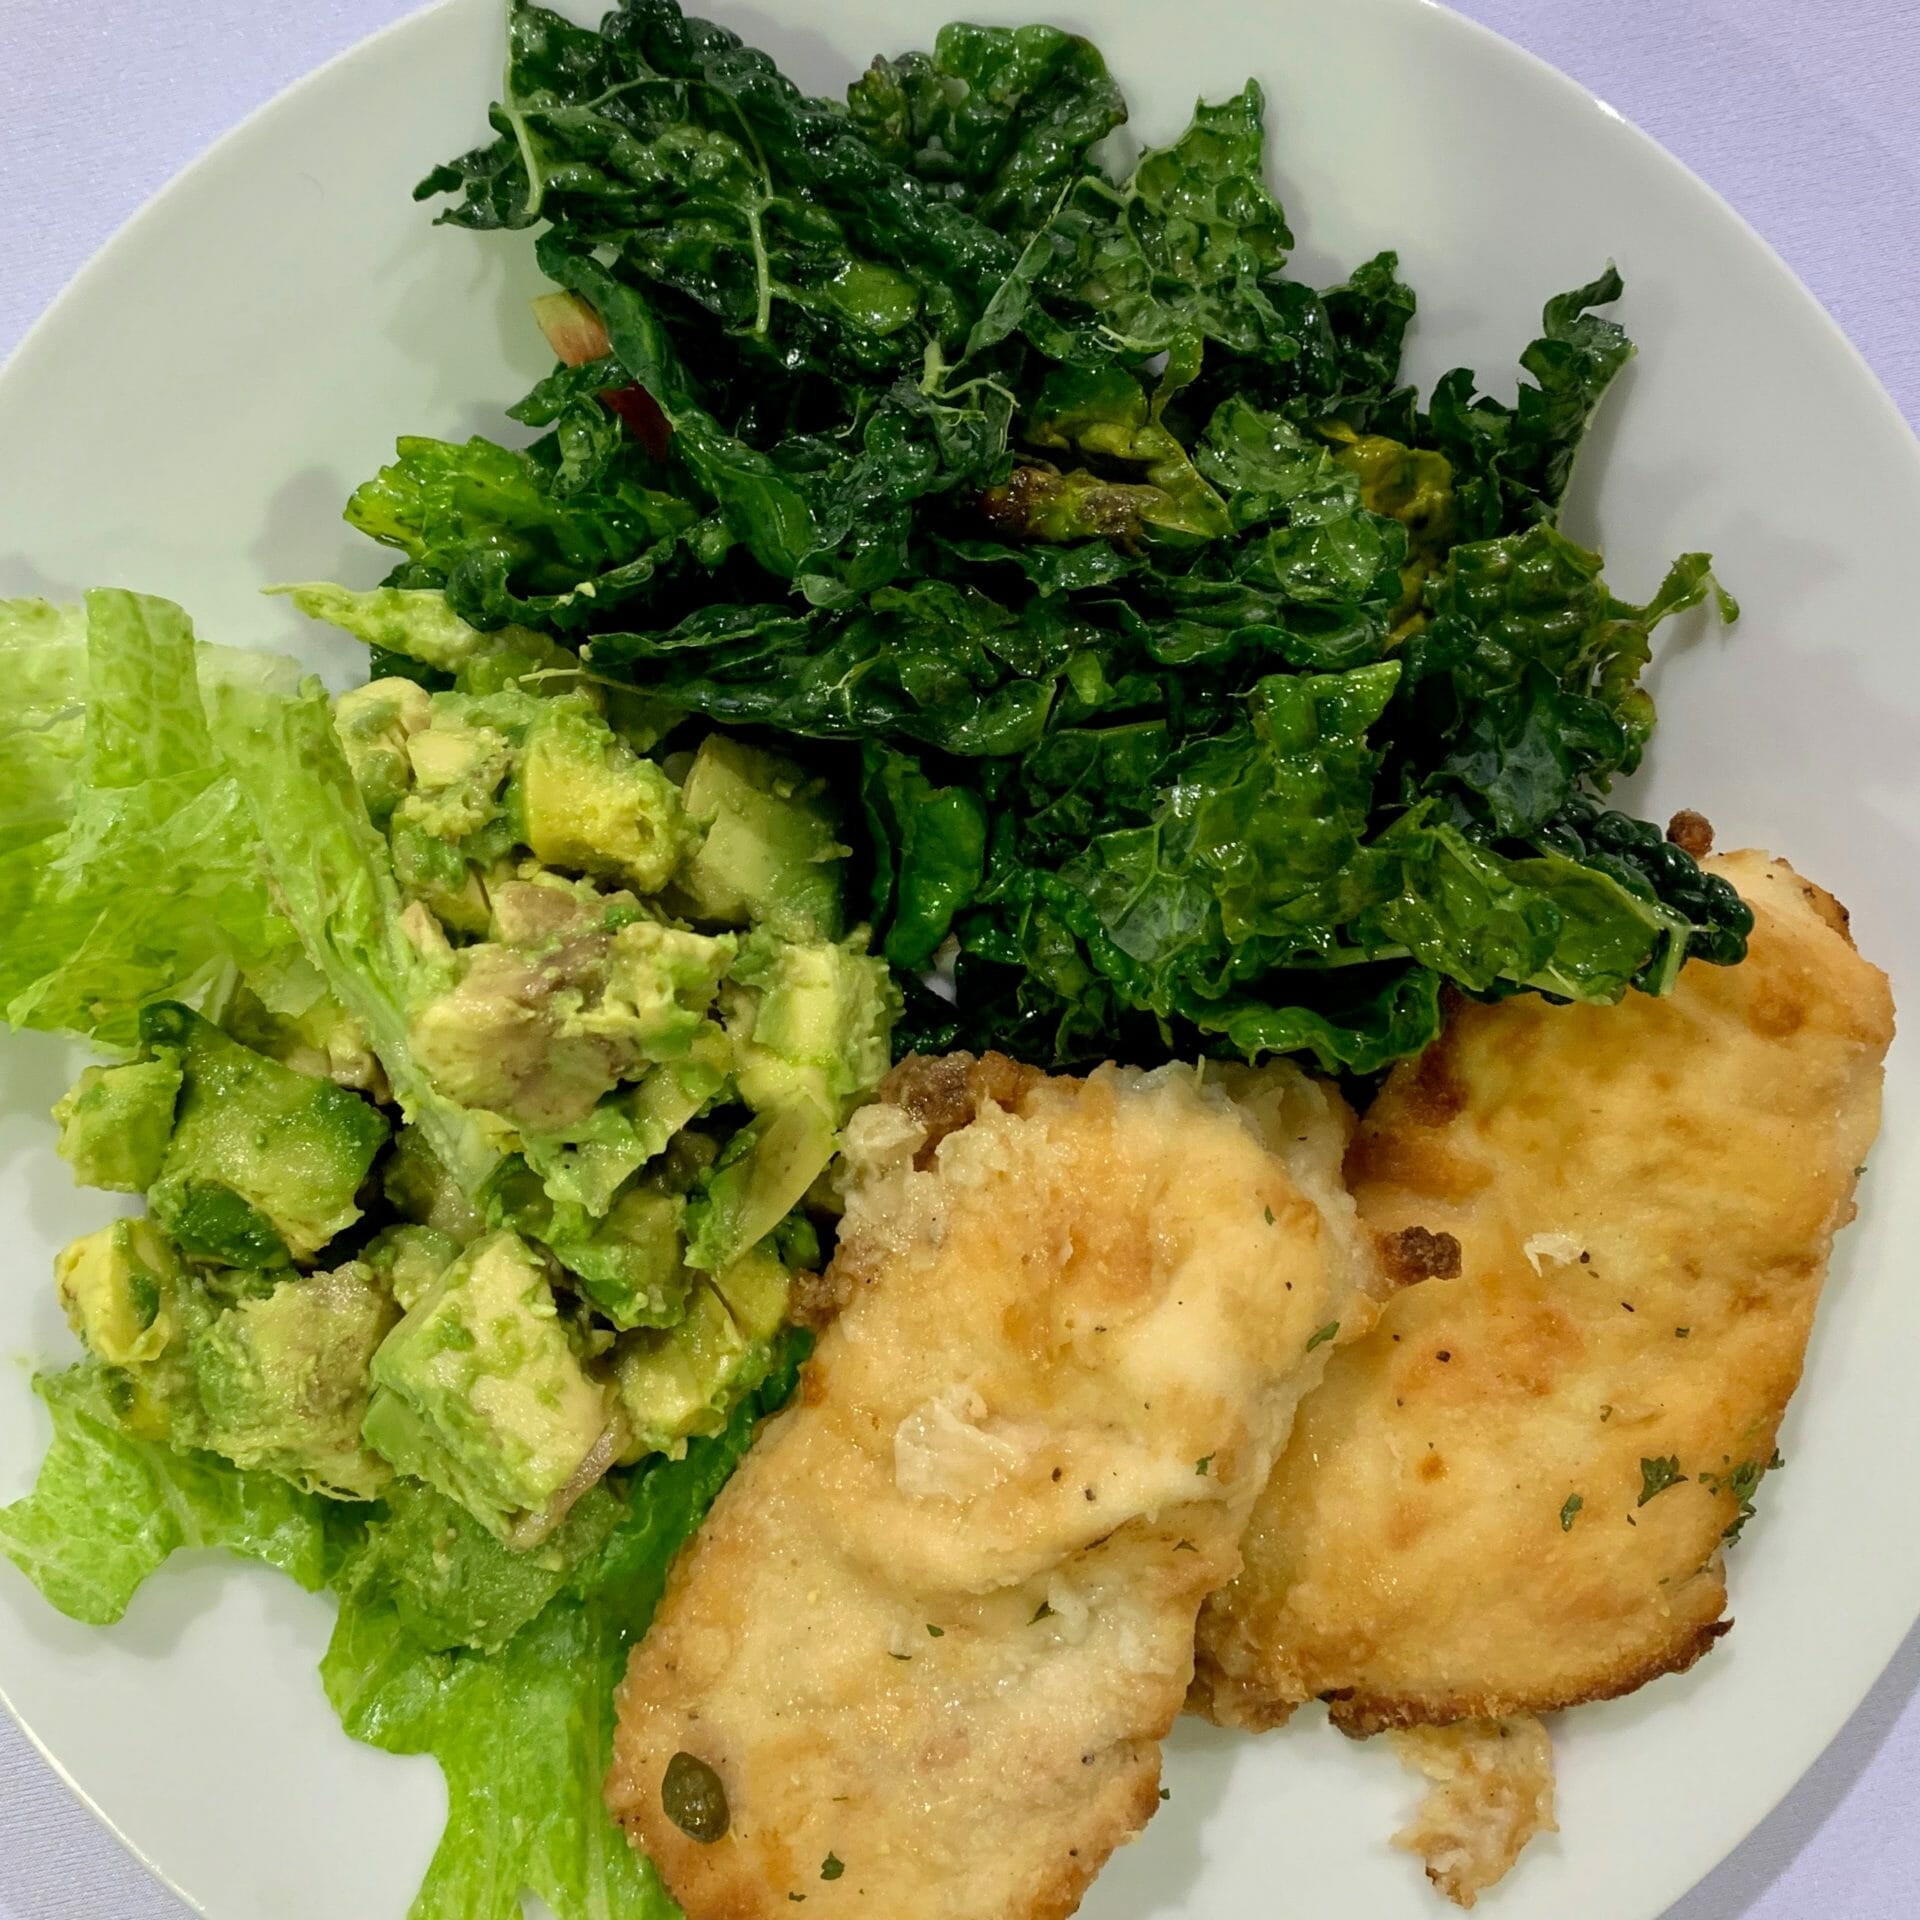 Fried fish with kale, lettuce and avocado